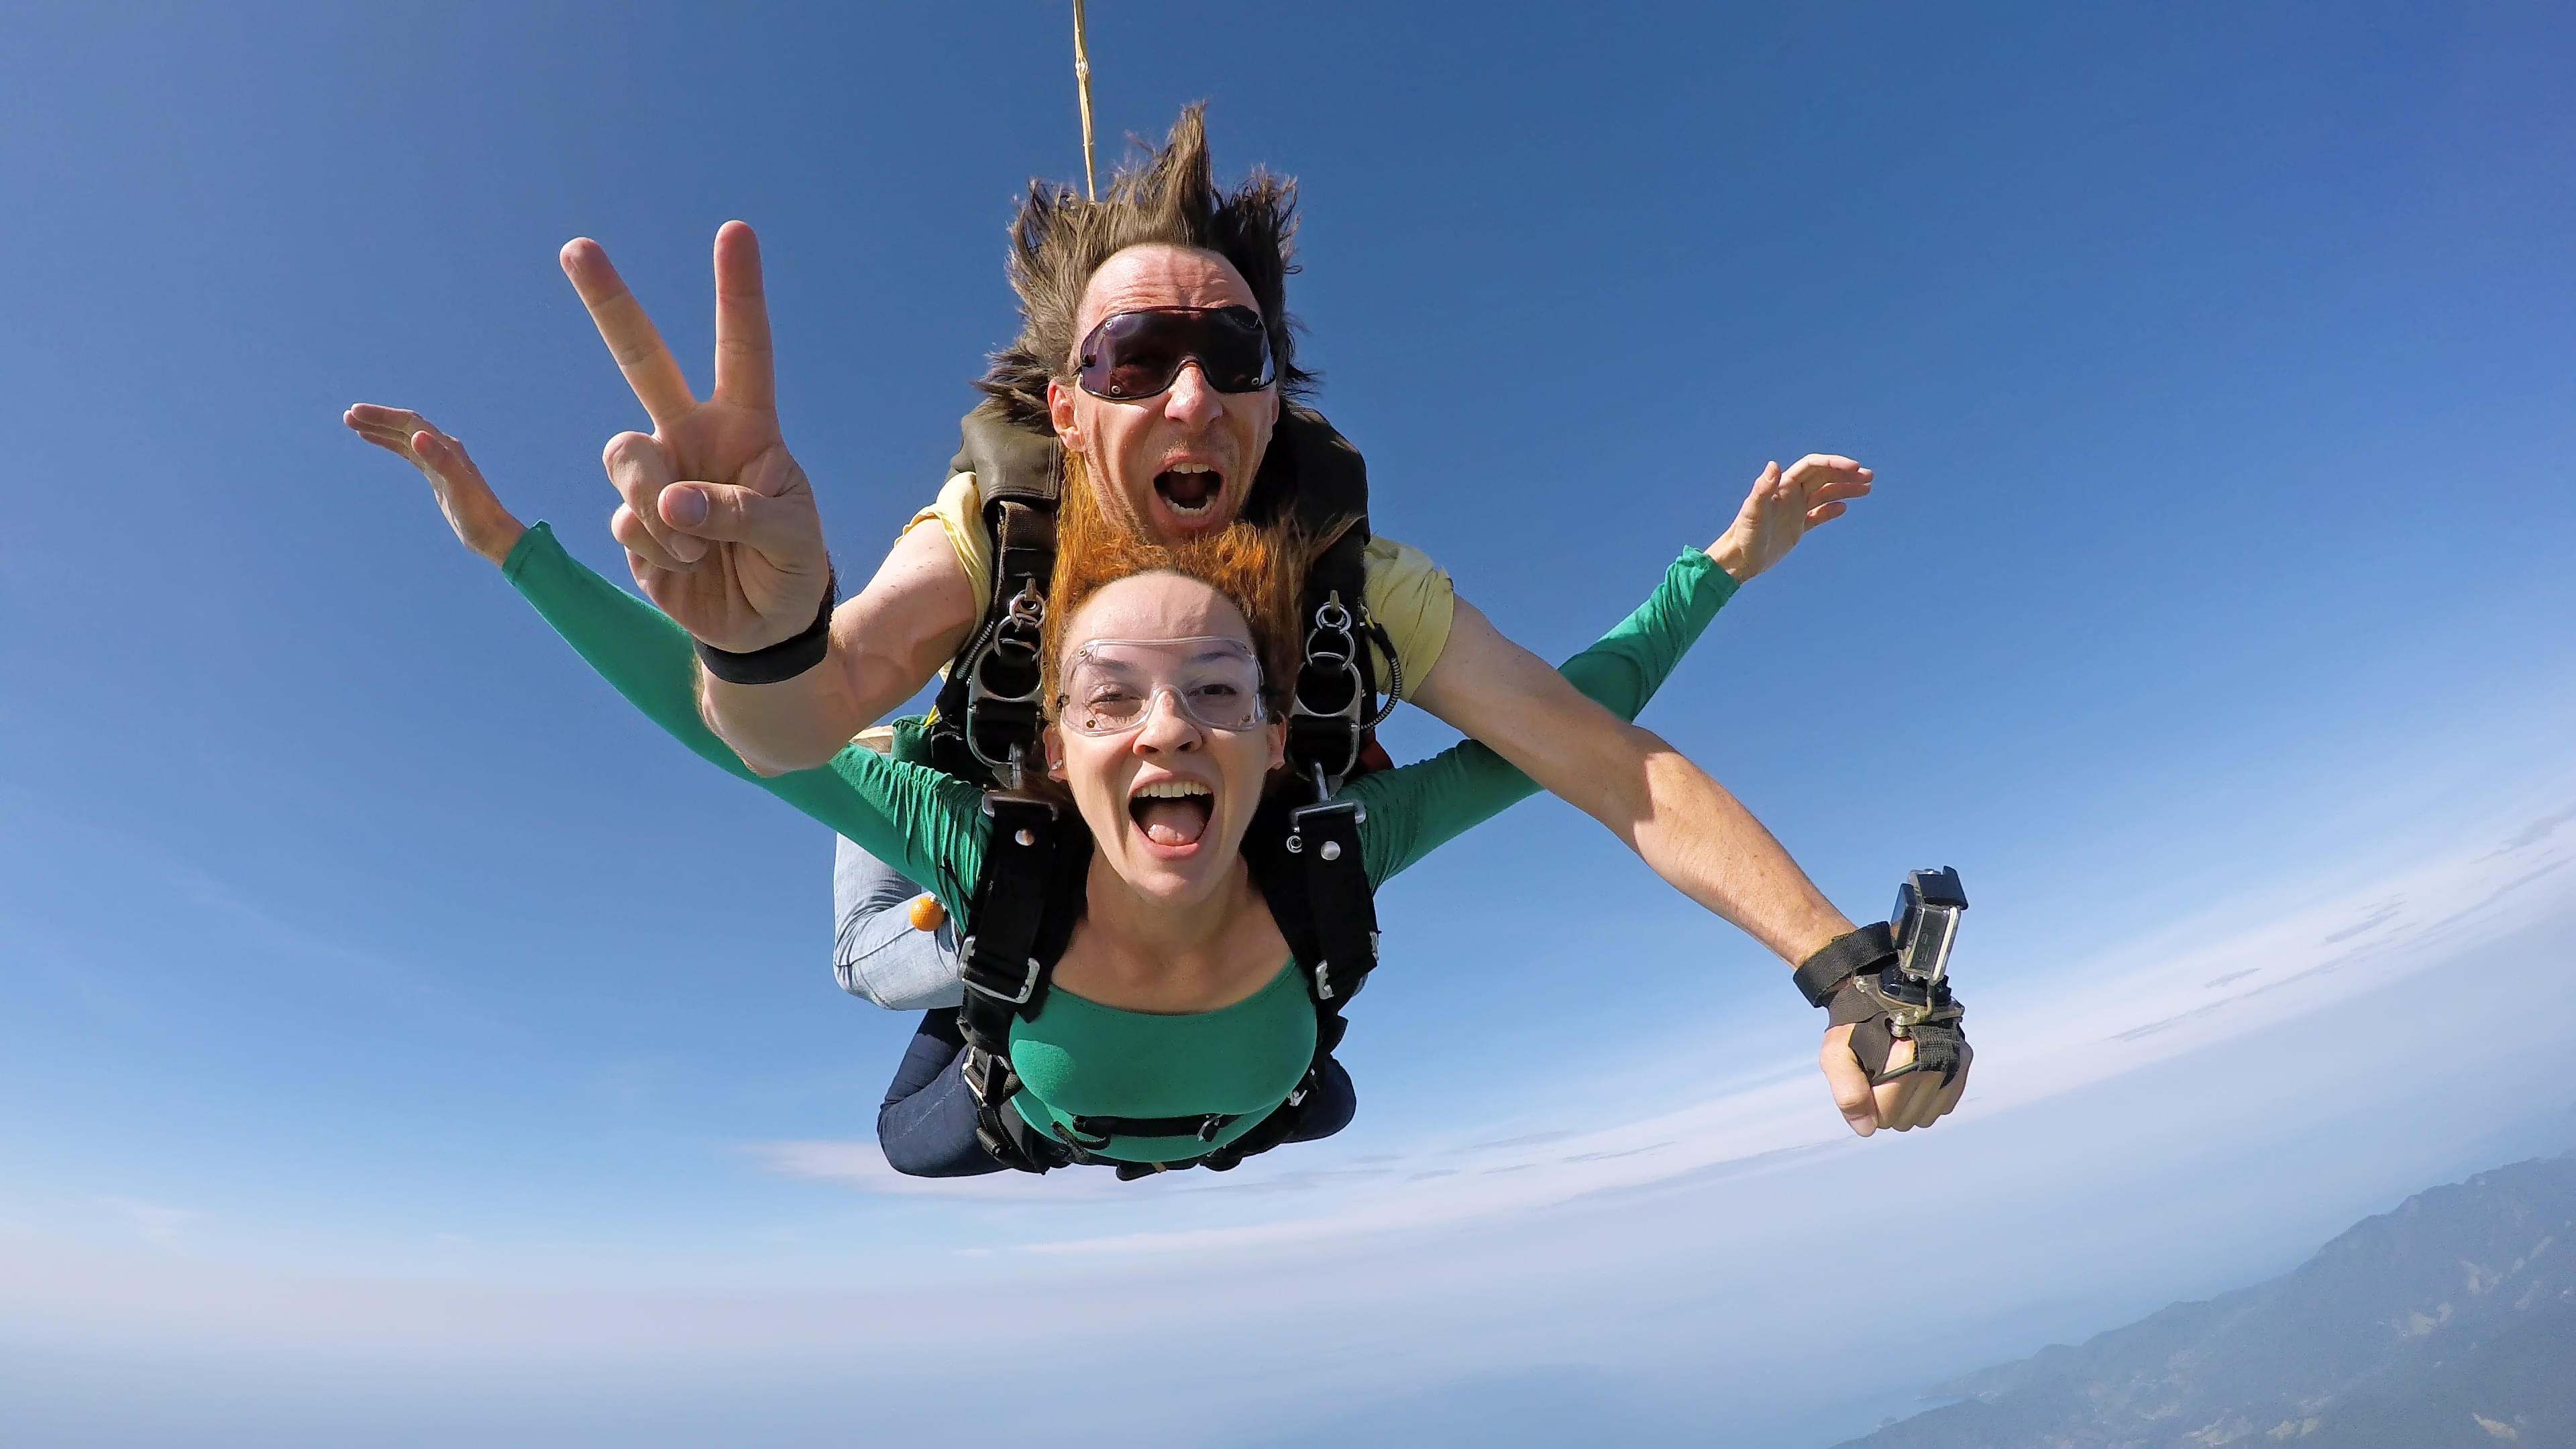 Feel the adrenaline as you skydive in New Castle from 15000 ft. of height